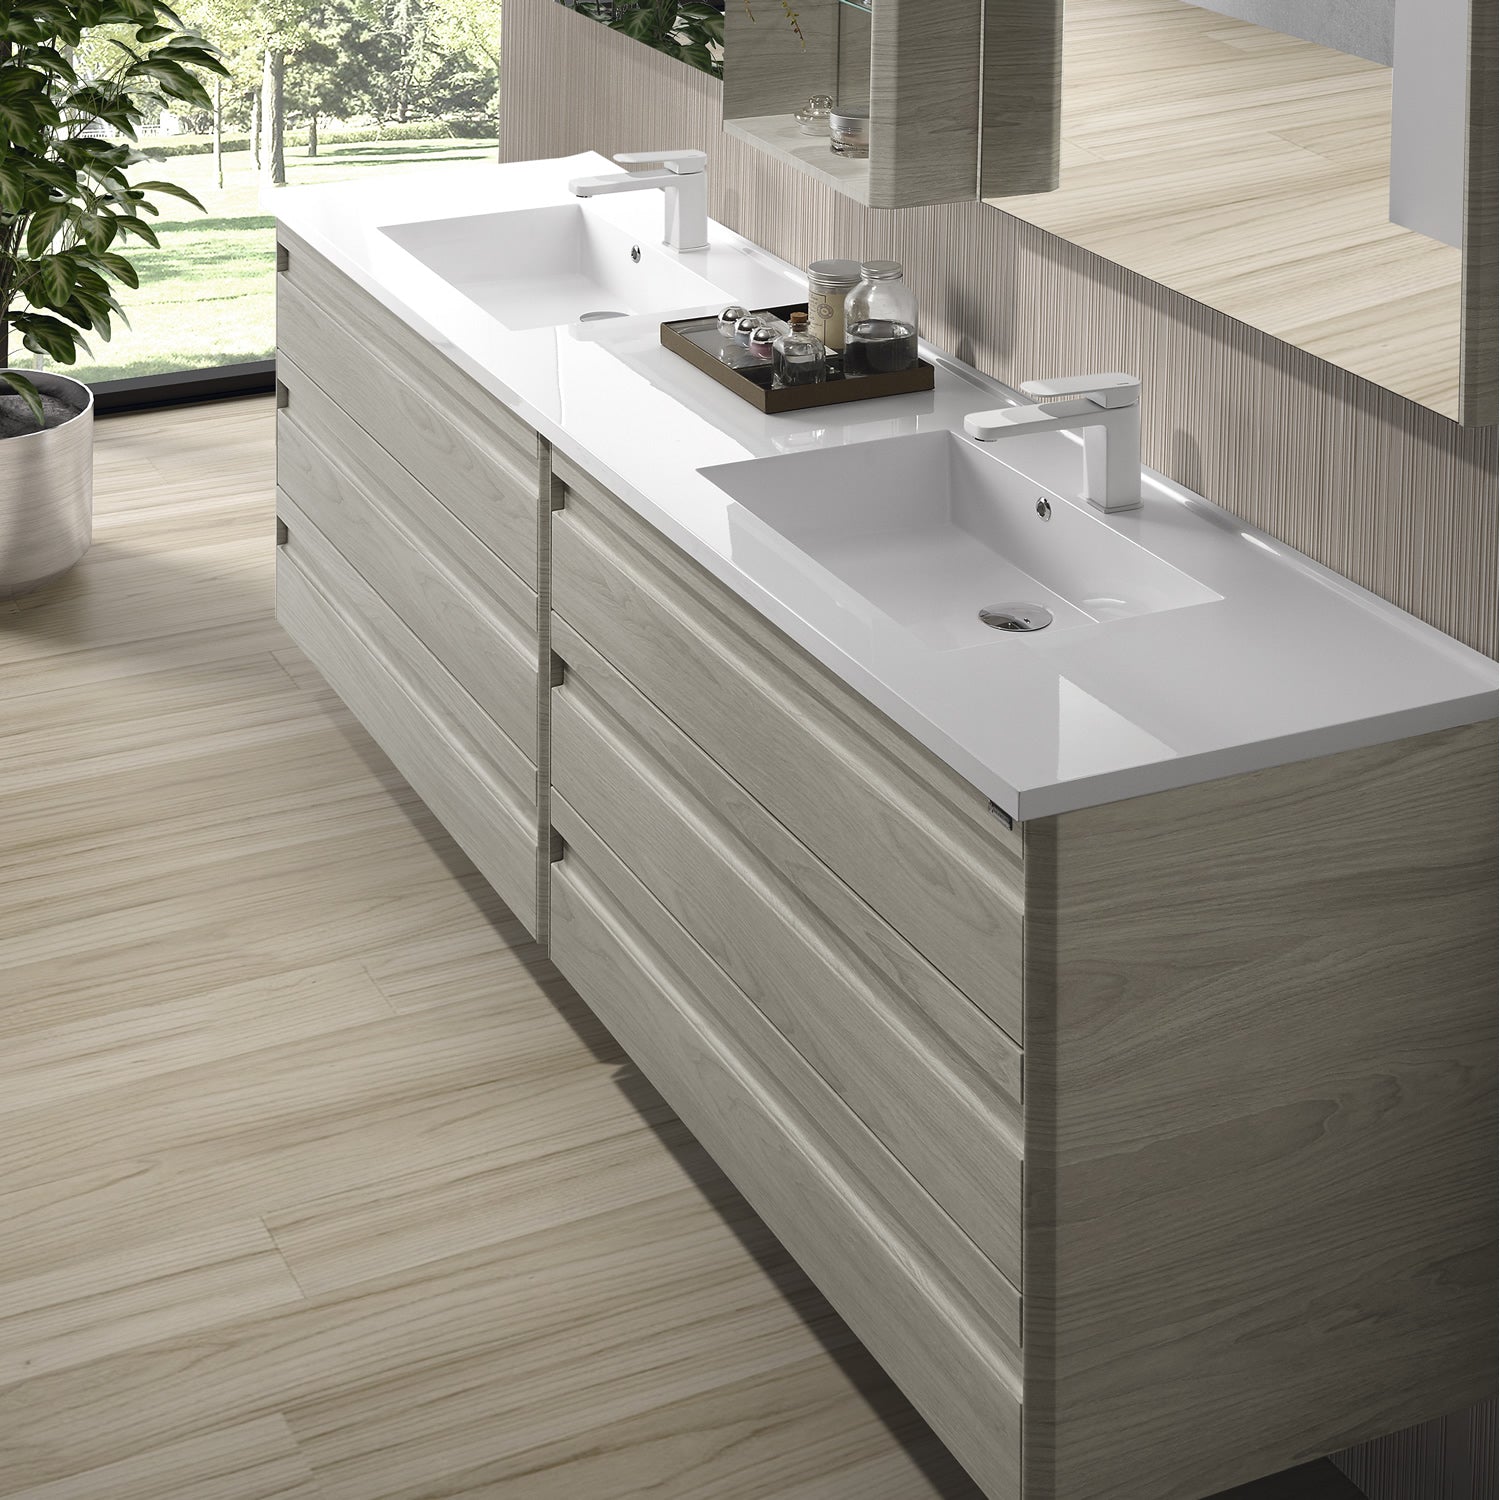 Valenzuela Barcelona Double Vanity Cabinet 6 Drawers 80 Inches Cloud